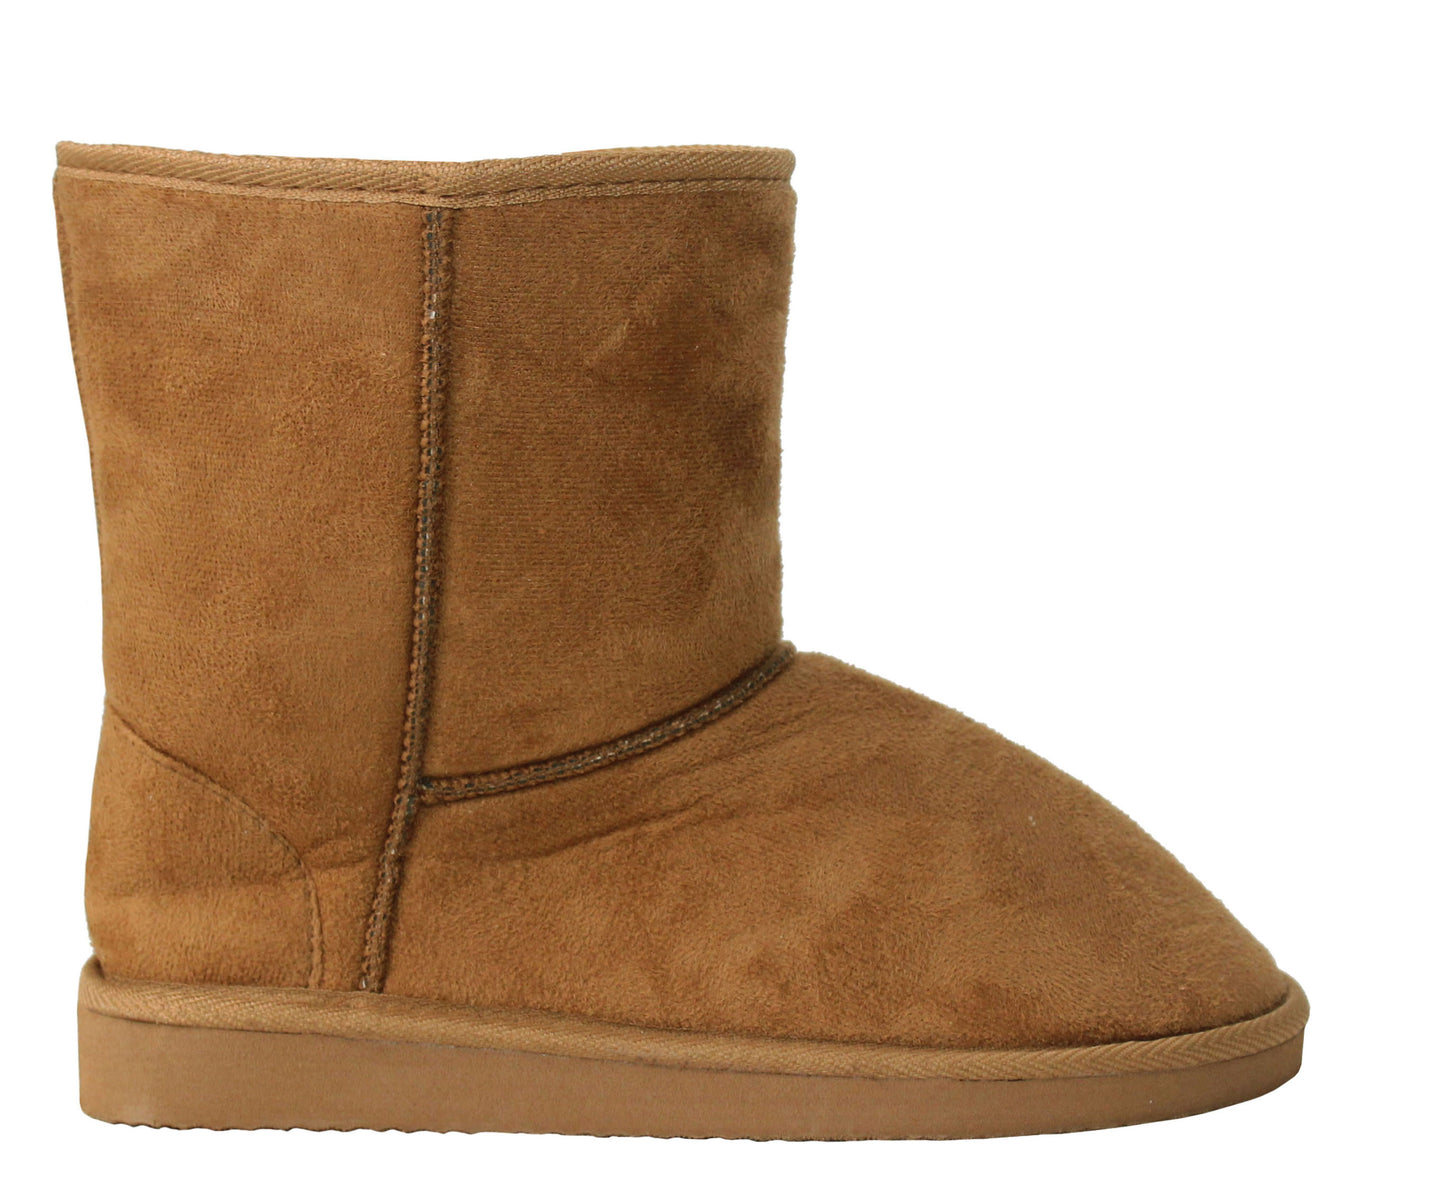 Girls Youth Kids Faux Suede Warm Fur Lined Slip On Mid Calf Snow Winter Tan Boots